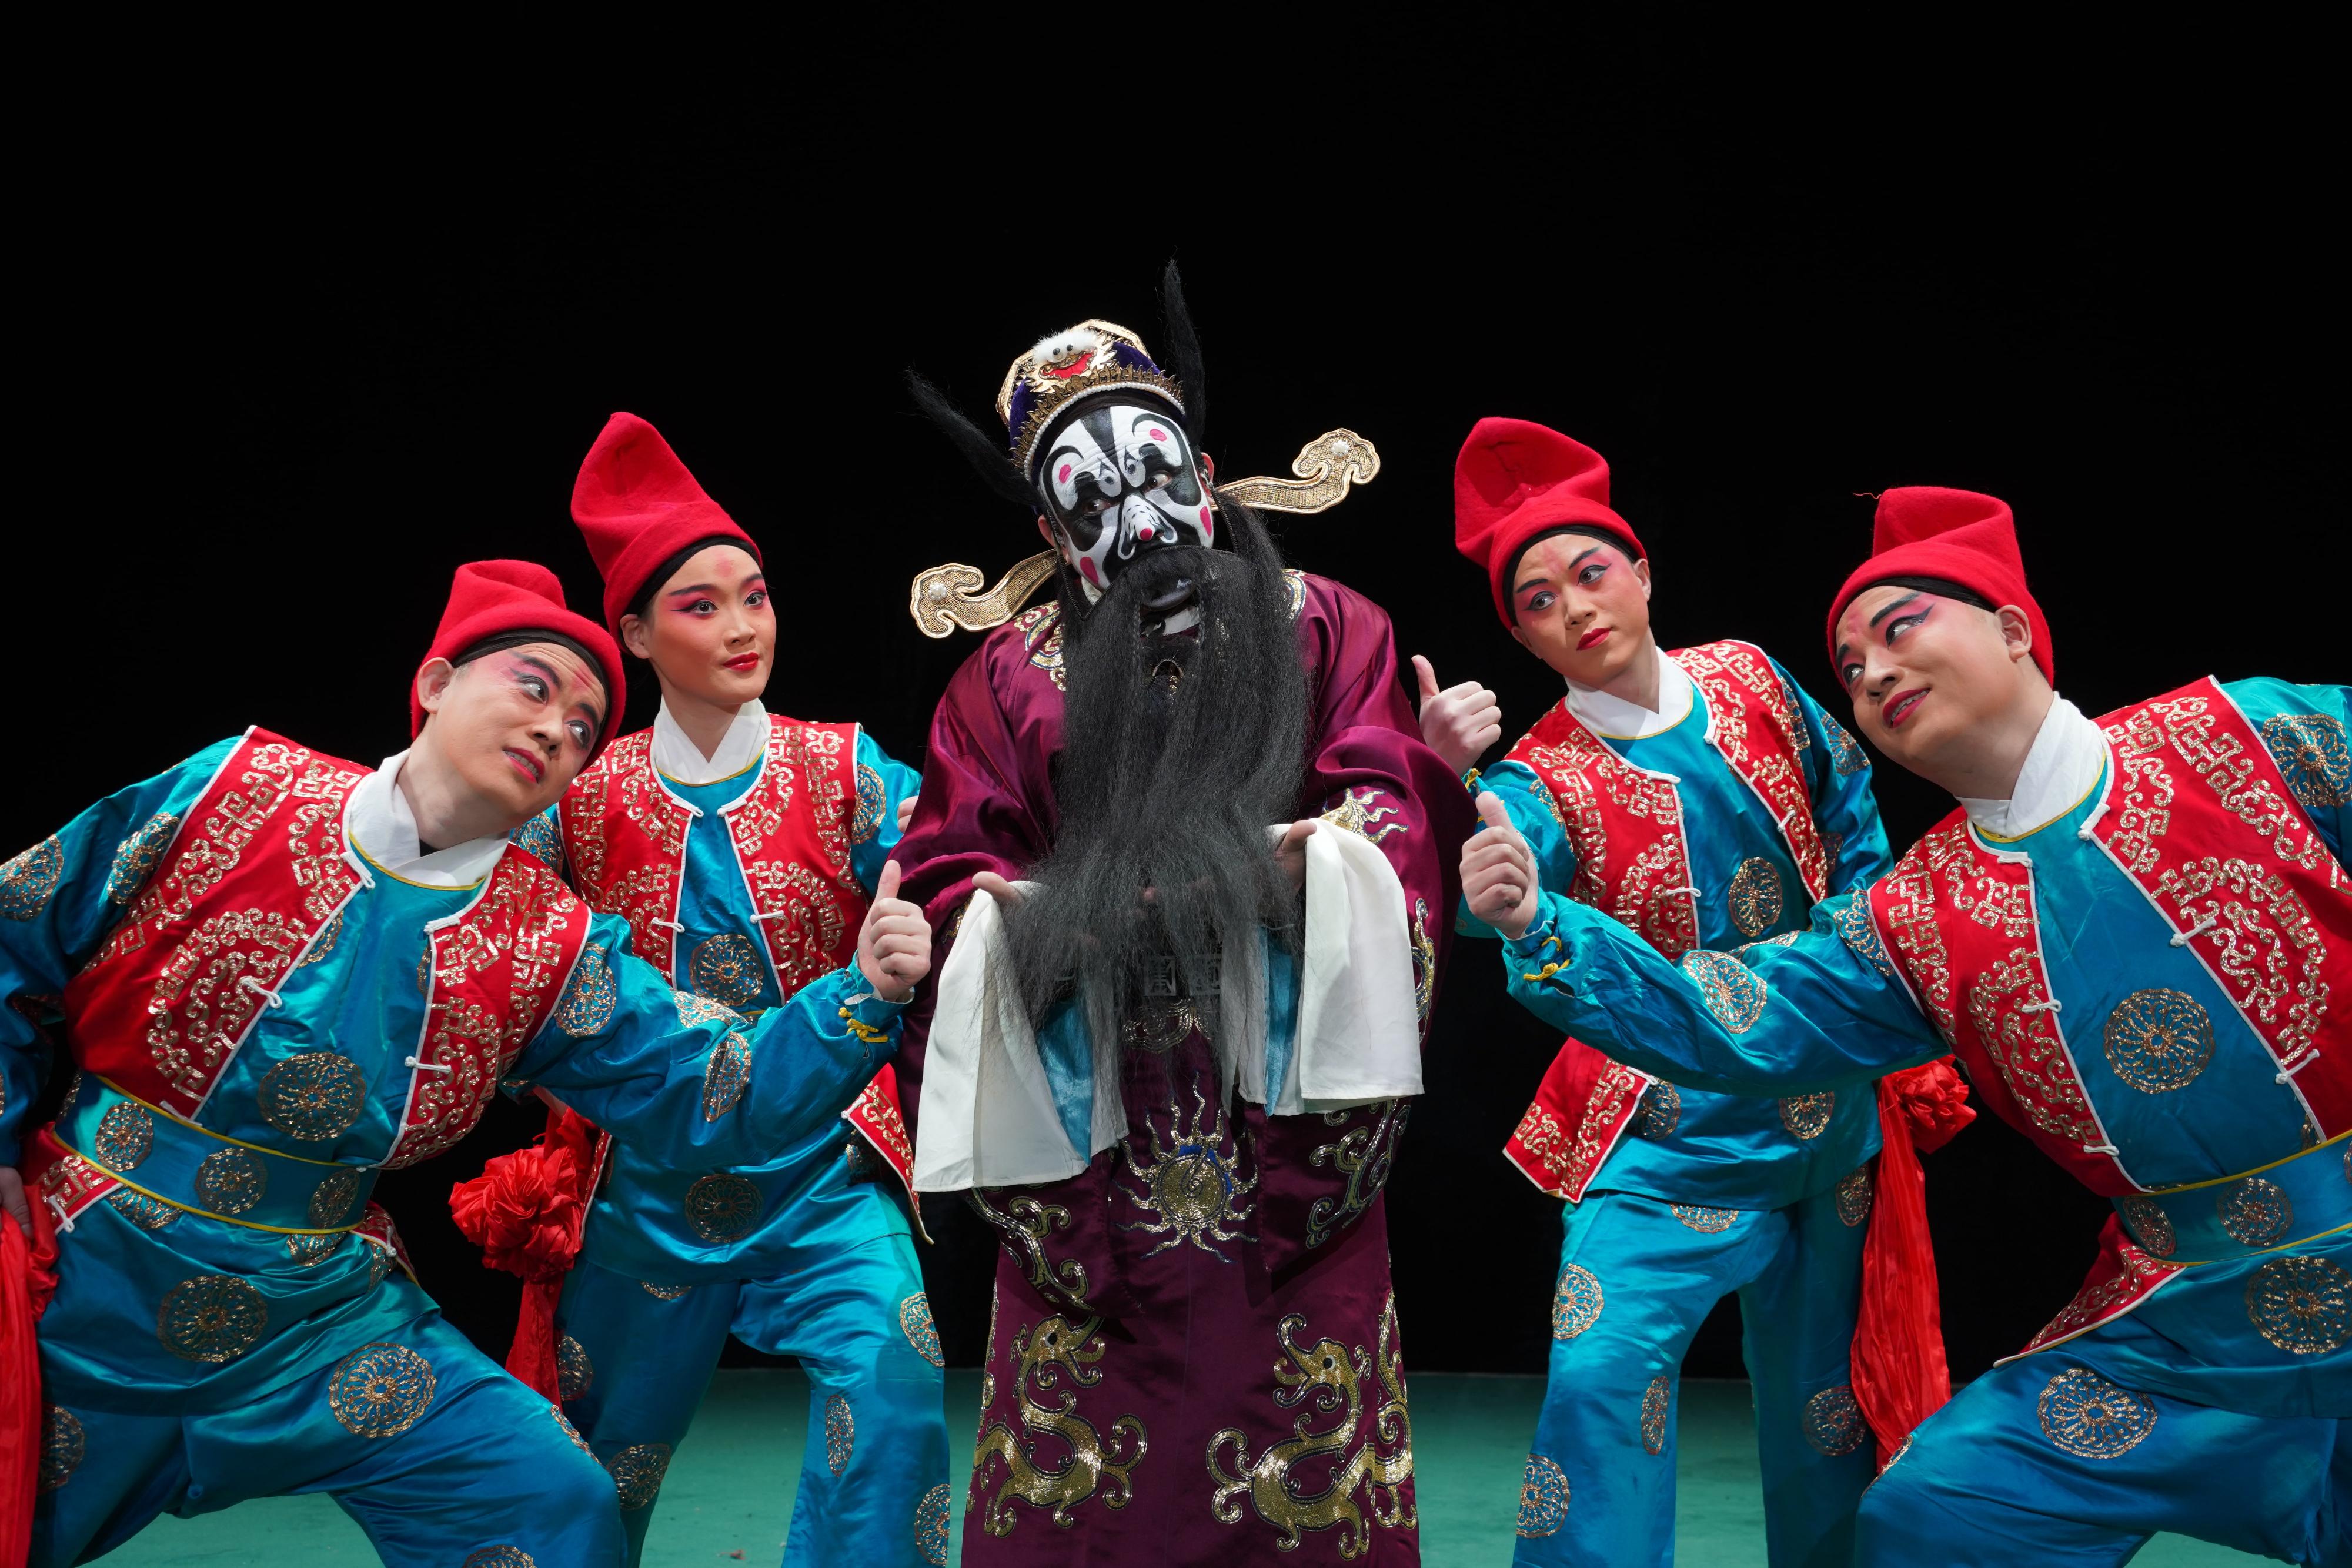 The inaugural Chinese Culture Festival will stage two classic Shandong Liuzi opera plays in July. Photo shows a scene from the performance "Zhang Fei Crashing the Palace Gate".